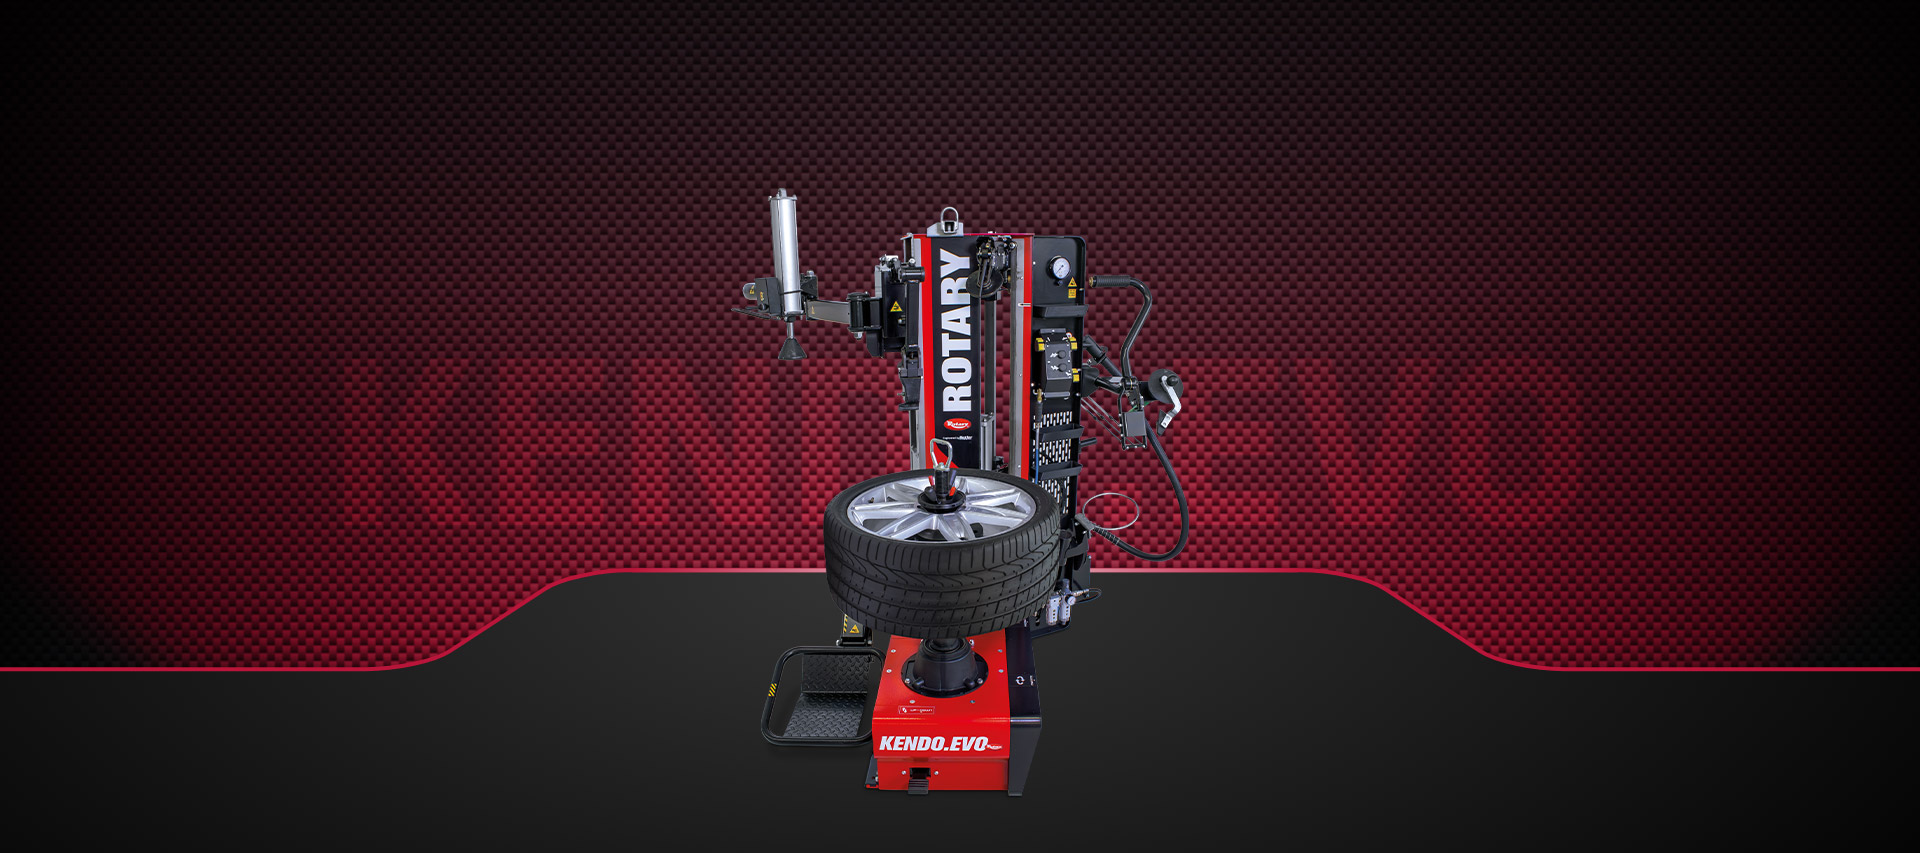 VSG launches the new Kendo.Evo tyre changer for the Rotary brand